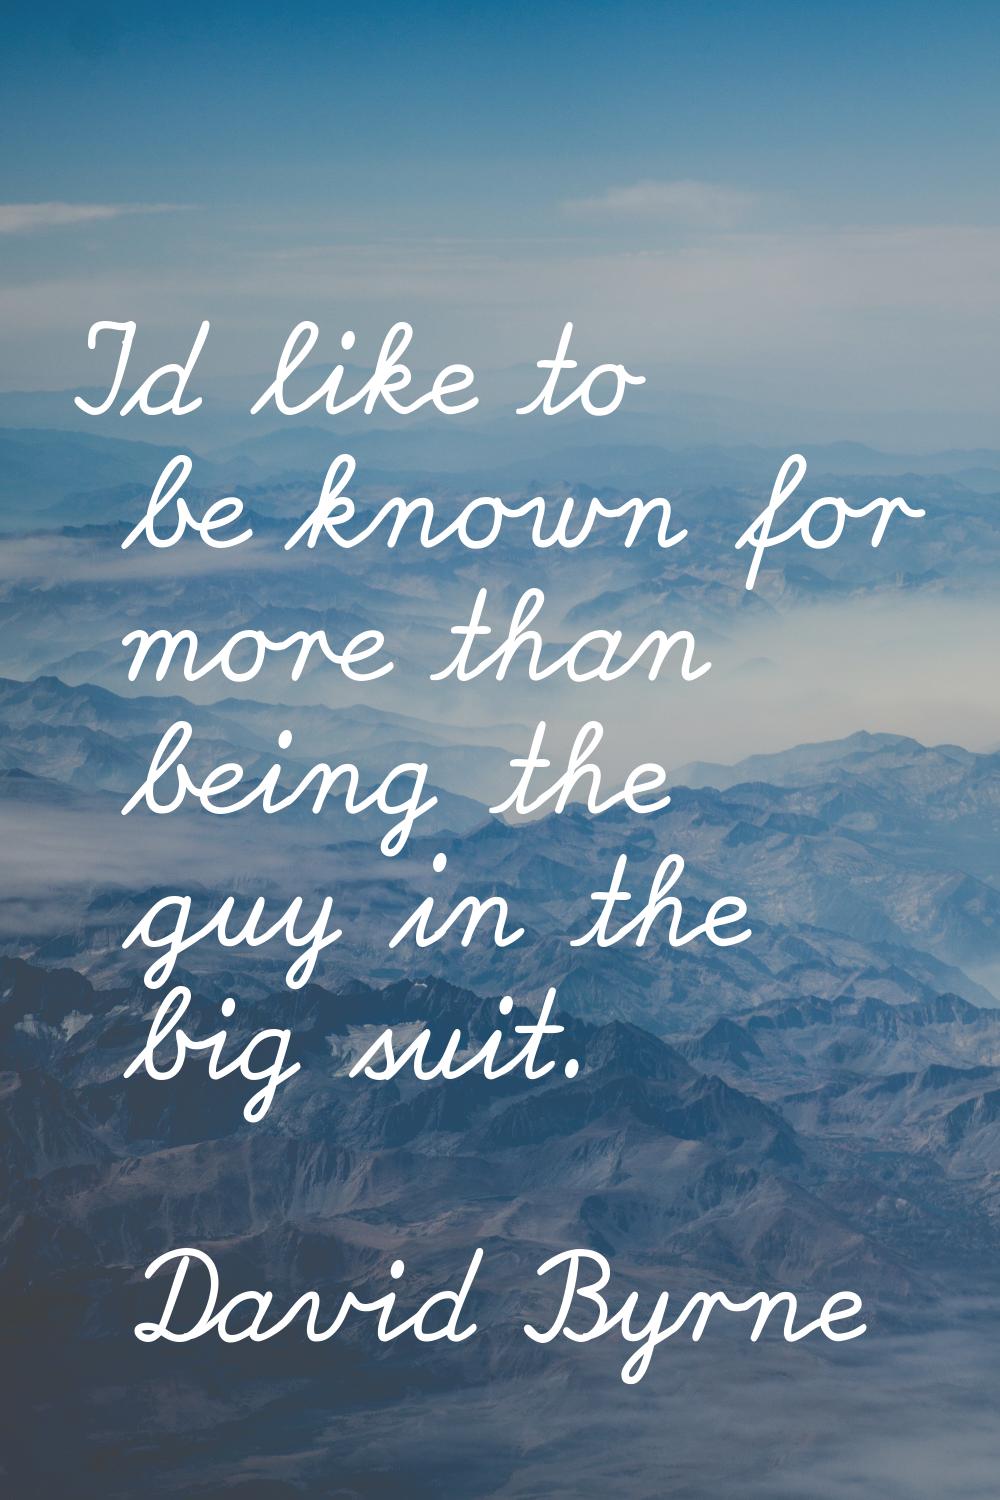 I'd like to be known for more than being the guy in the big suit.